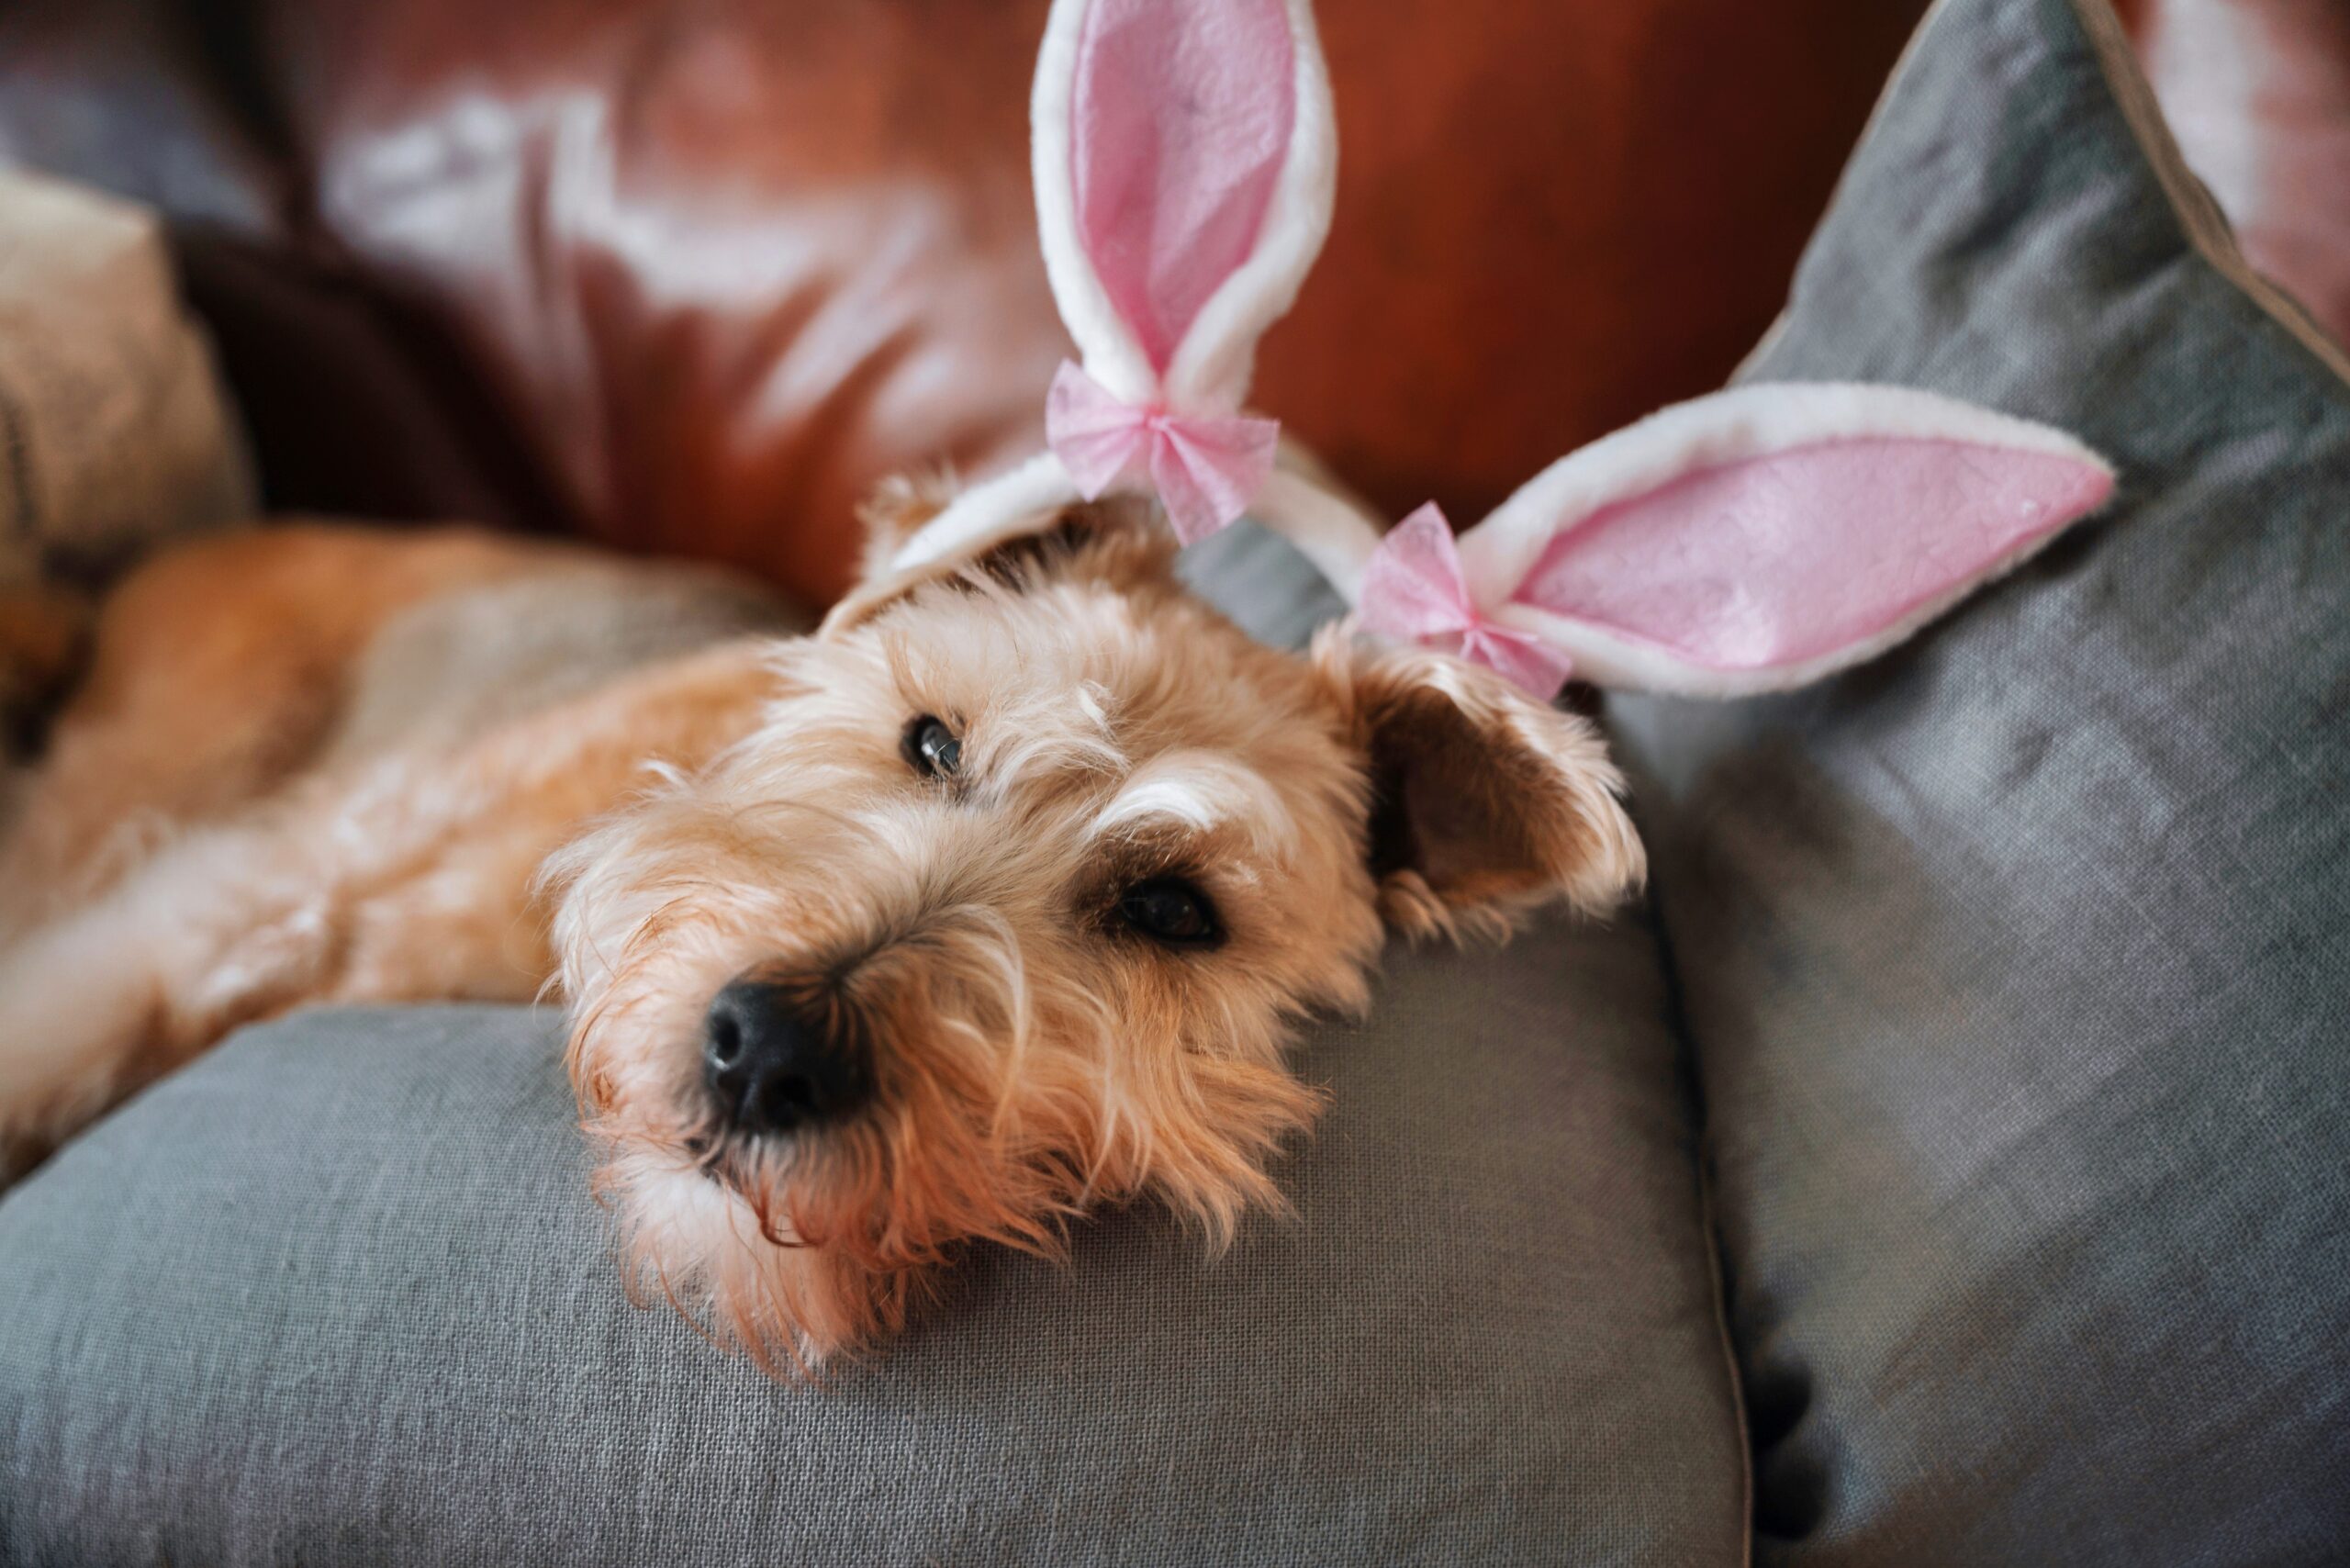 Celebrate Easter with Pets While Keeping Hazards at Bay